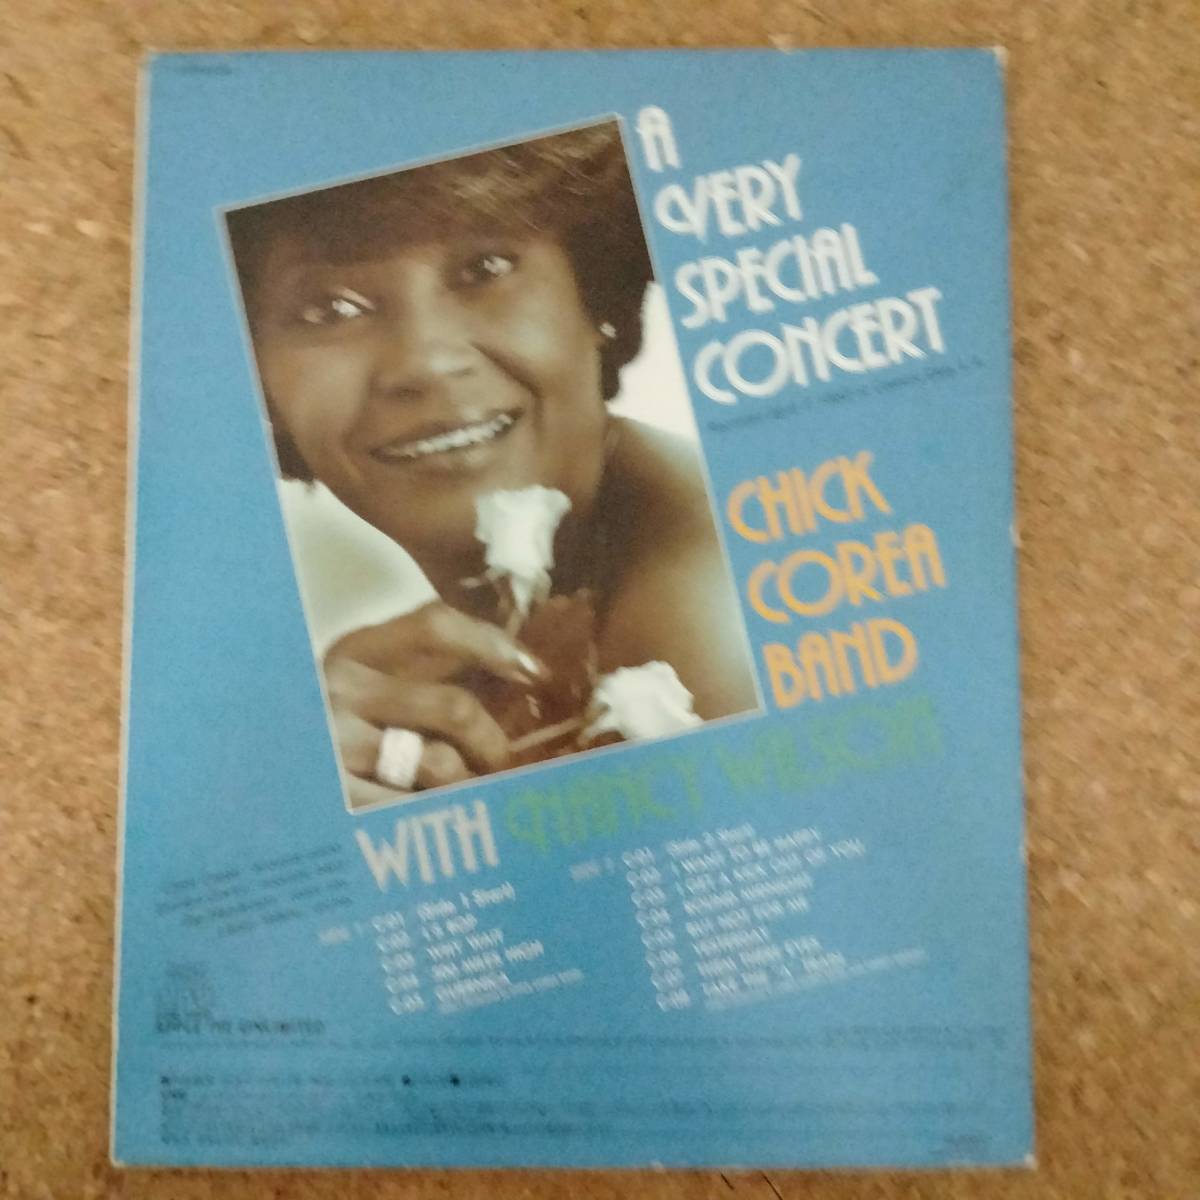  water |VHD video disk сhick *ko rear [Chick Corea BVand with Nansy Wilson]l Berry * special * concert 